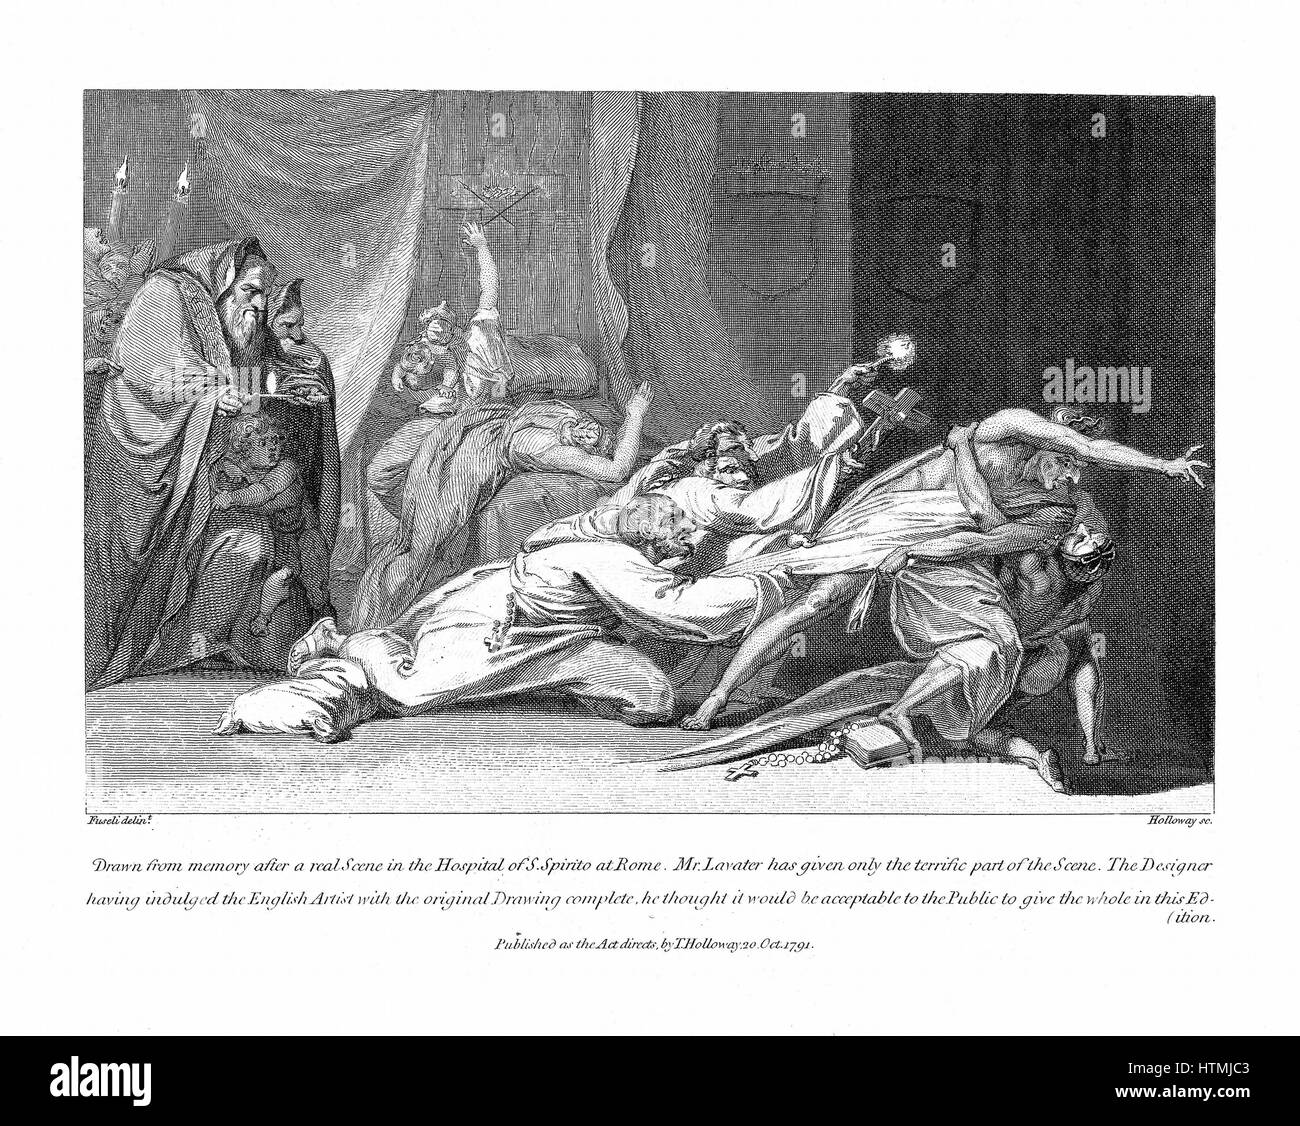 Attempt to exorcise evil spirits possessing patient in San Spirito Hospital, Rome. Illustration by Fuseli based on Lavater's description. From Lavater 'Essays on Physiognomy', London, 1792. Engraving. Stock Photo